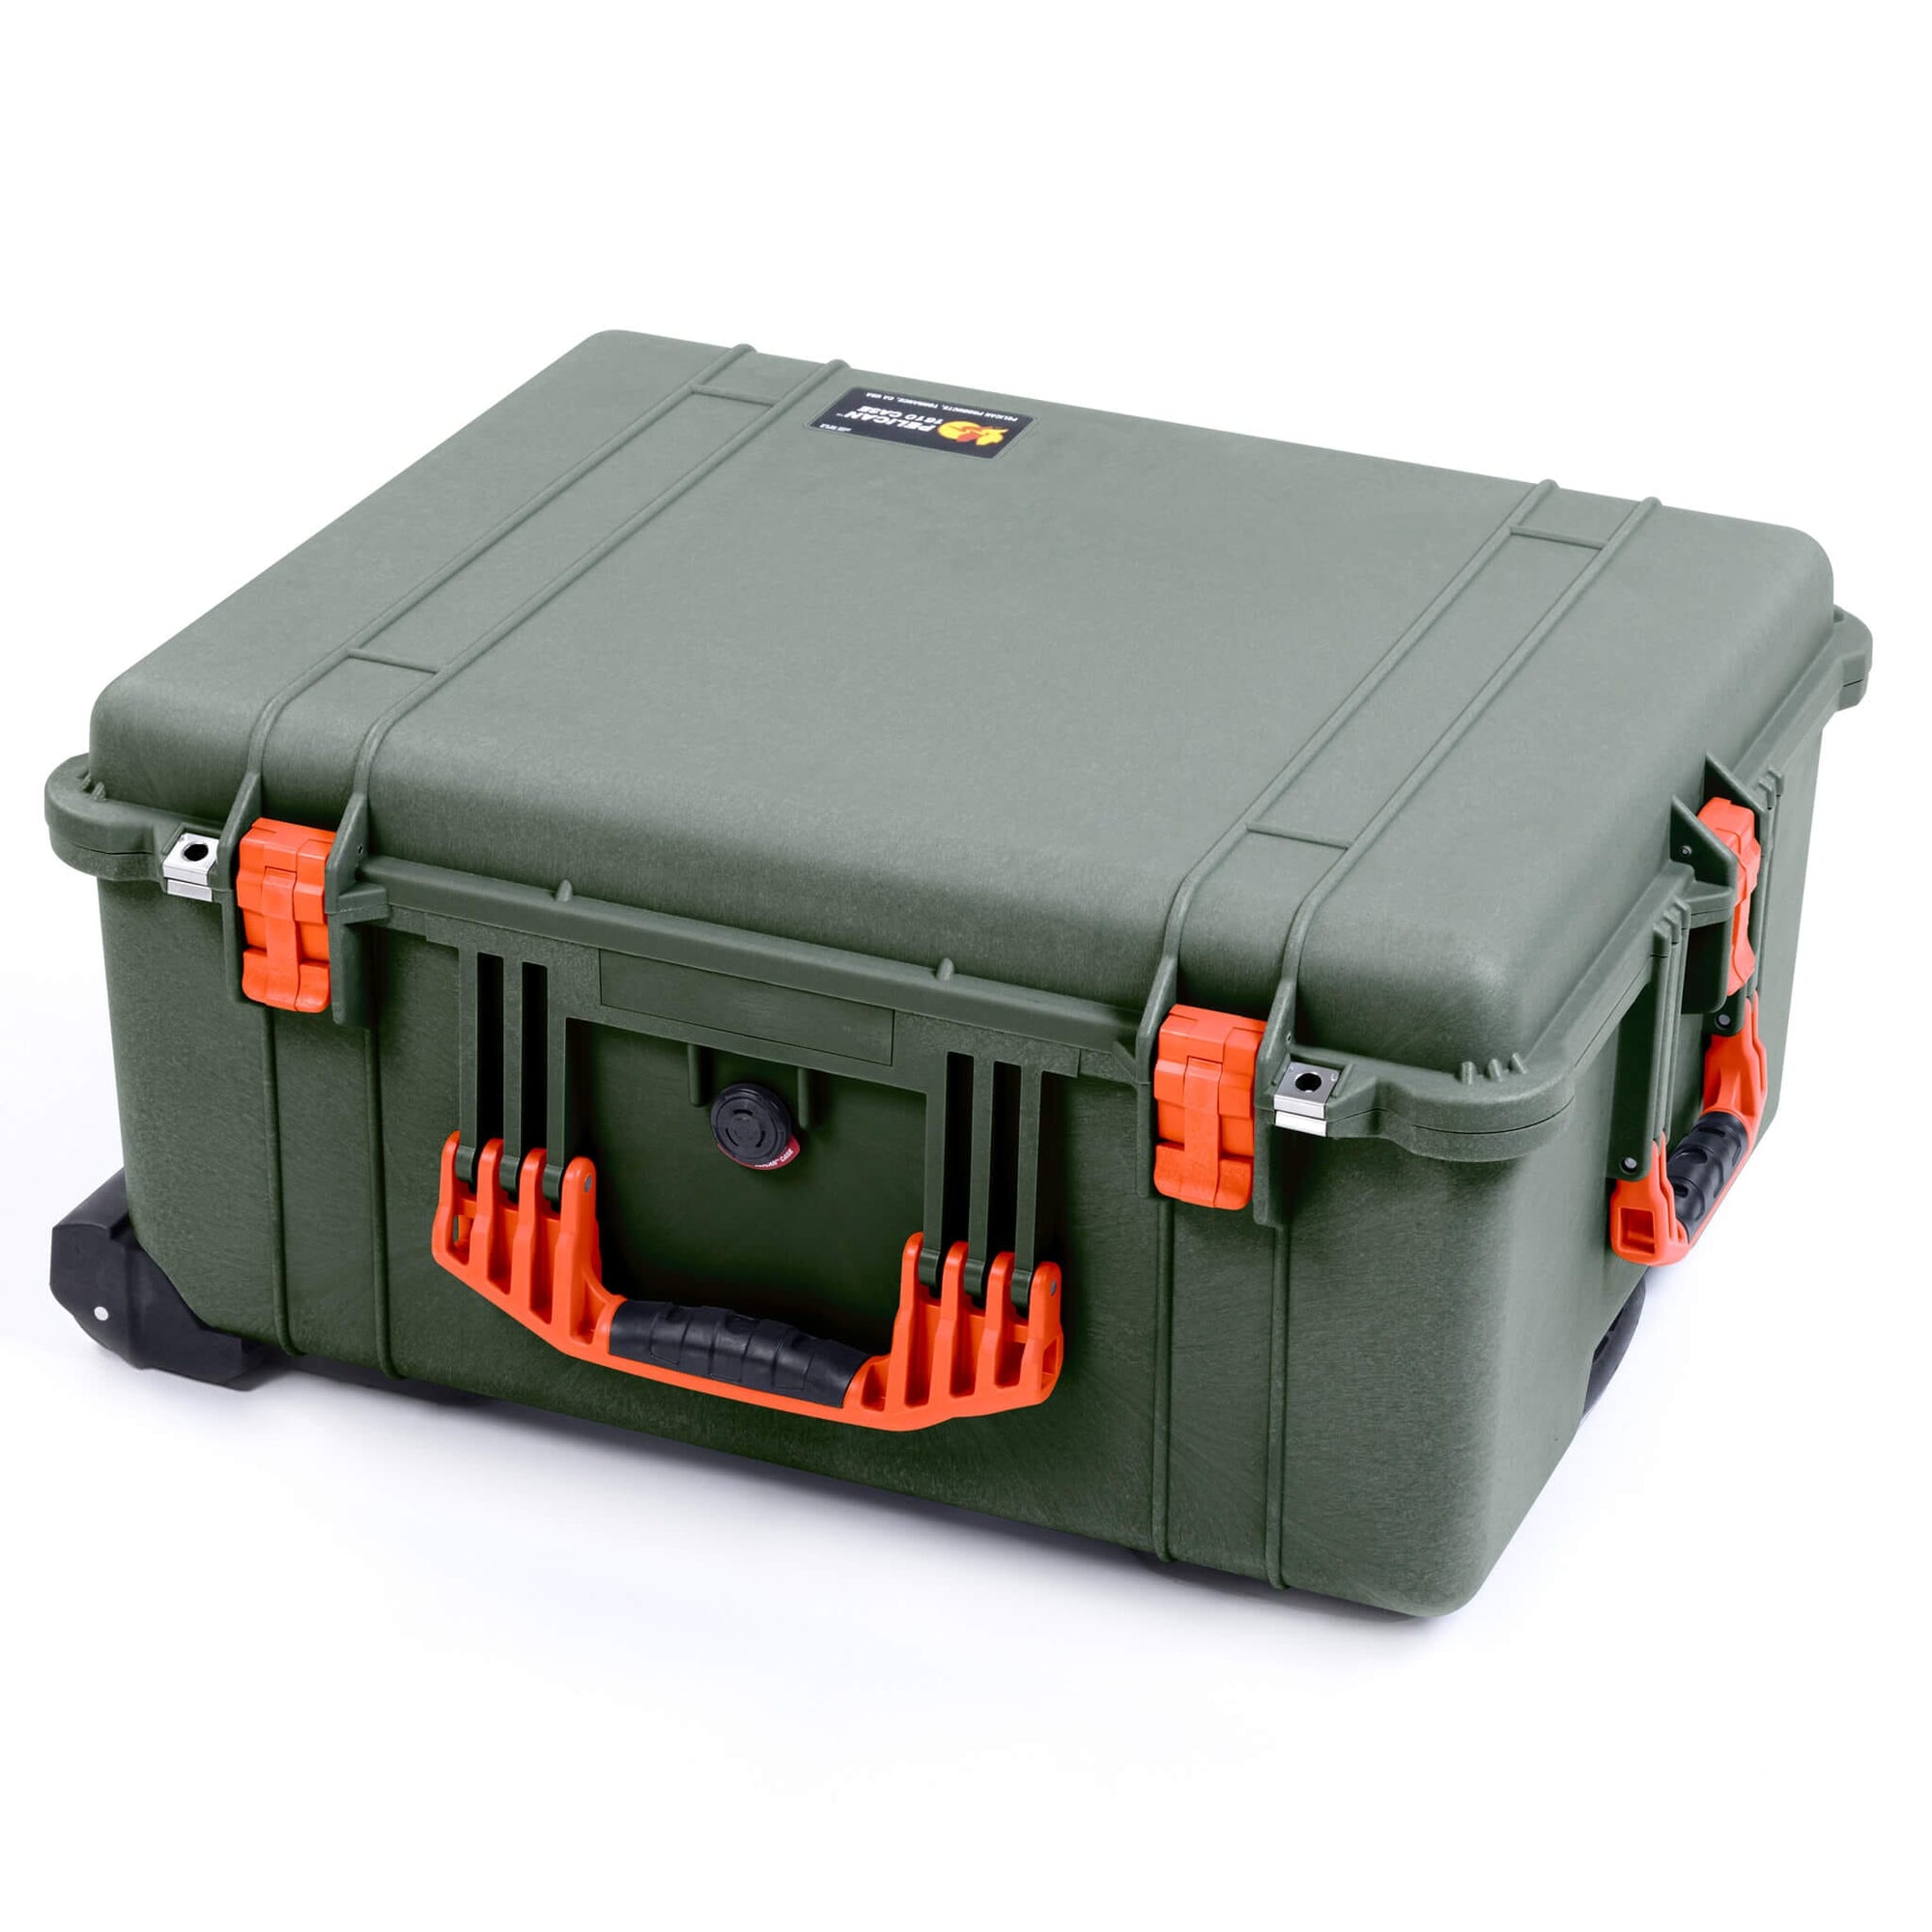 Pelican 1610 Case, OD Green with Orange Handles and Latches